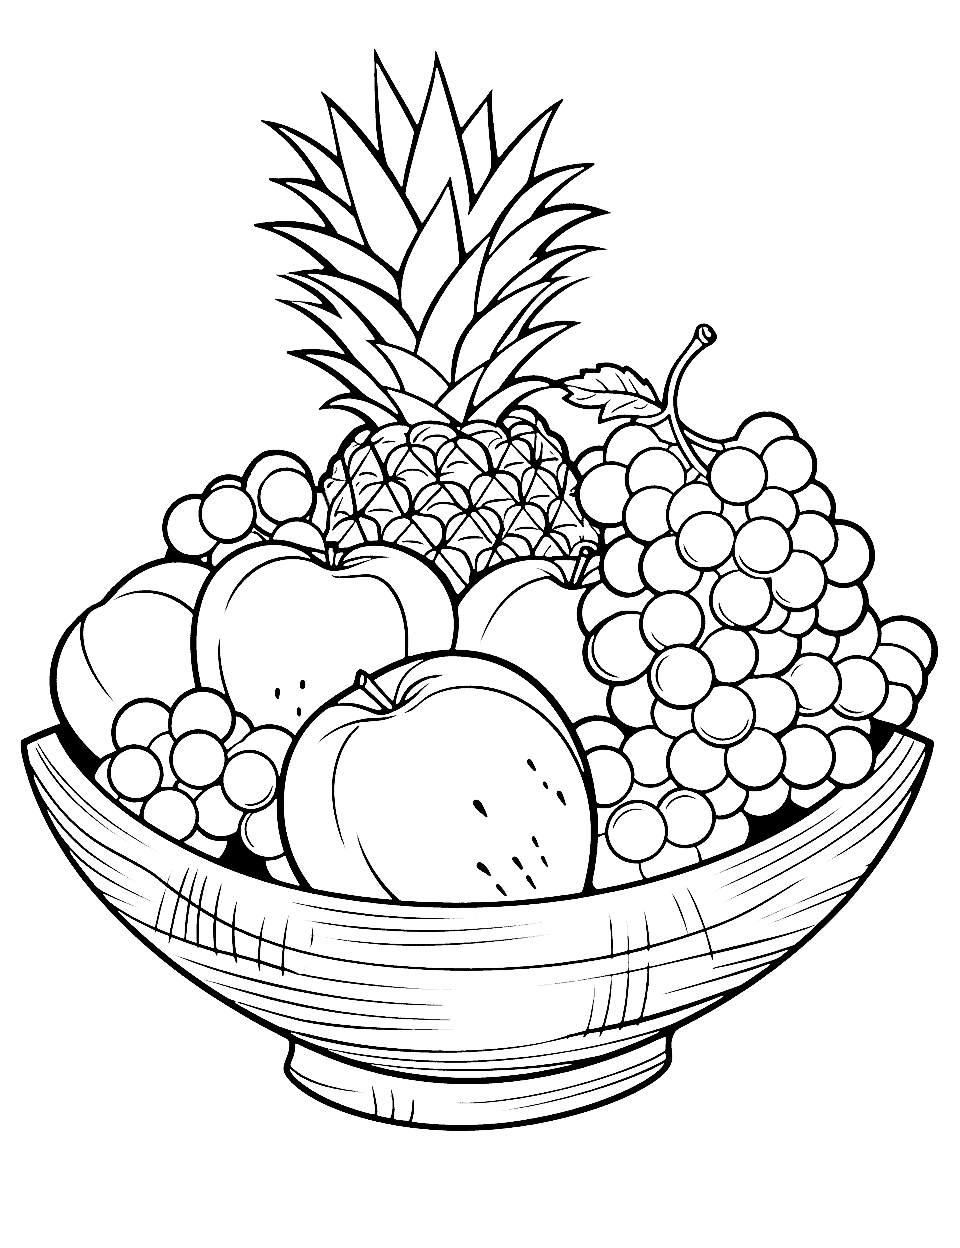 Fruit Basket Bonanza Coloring Page - A large fruit basket overflowing with fruits.